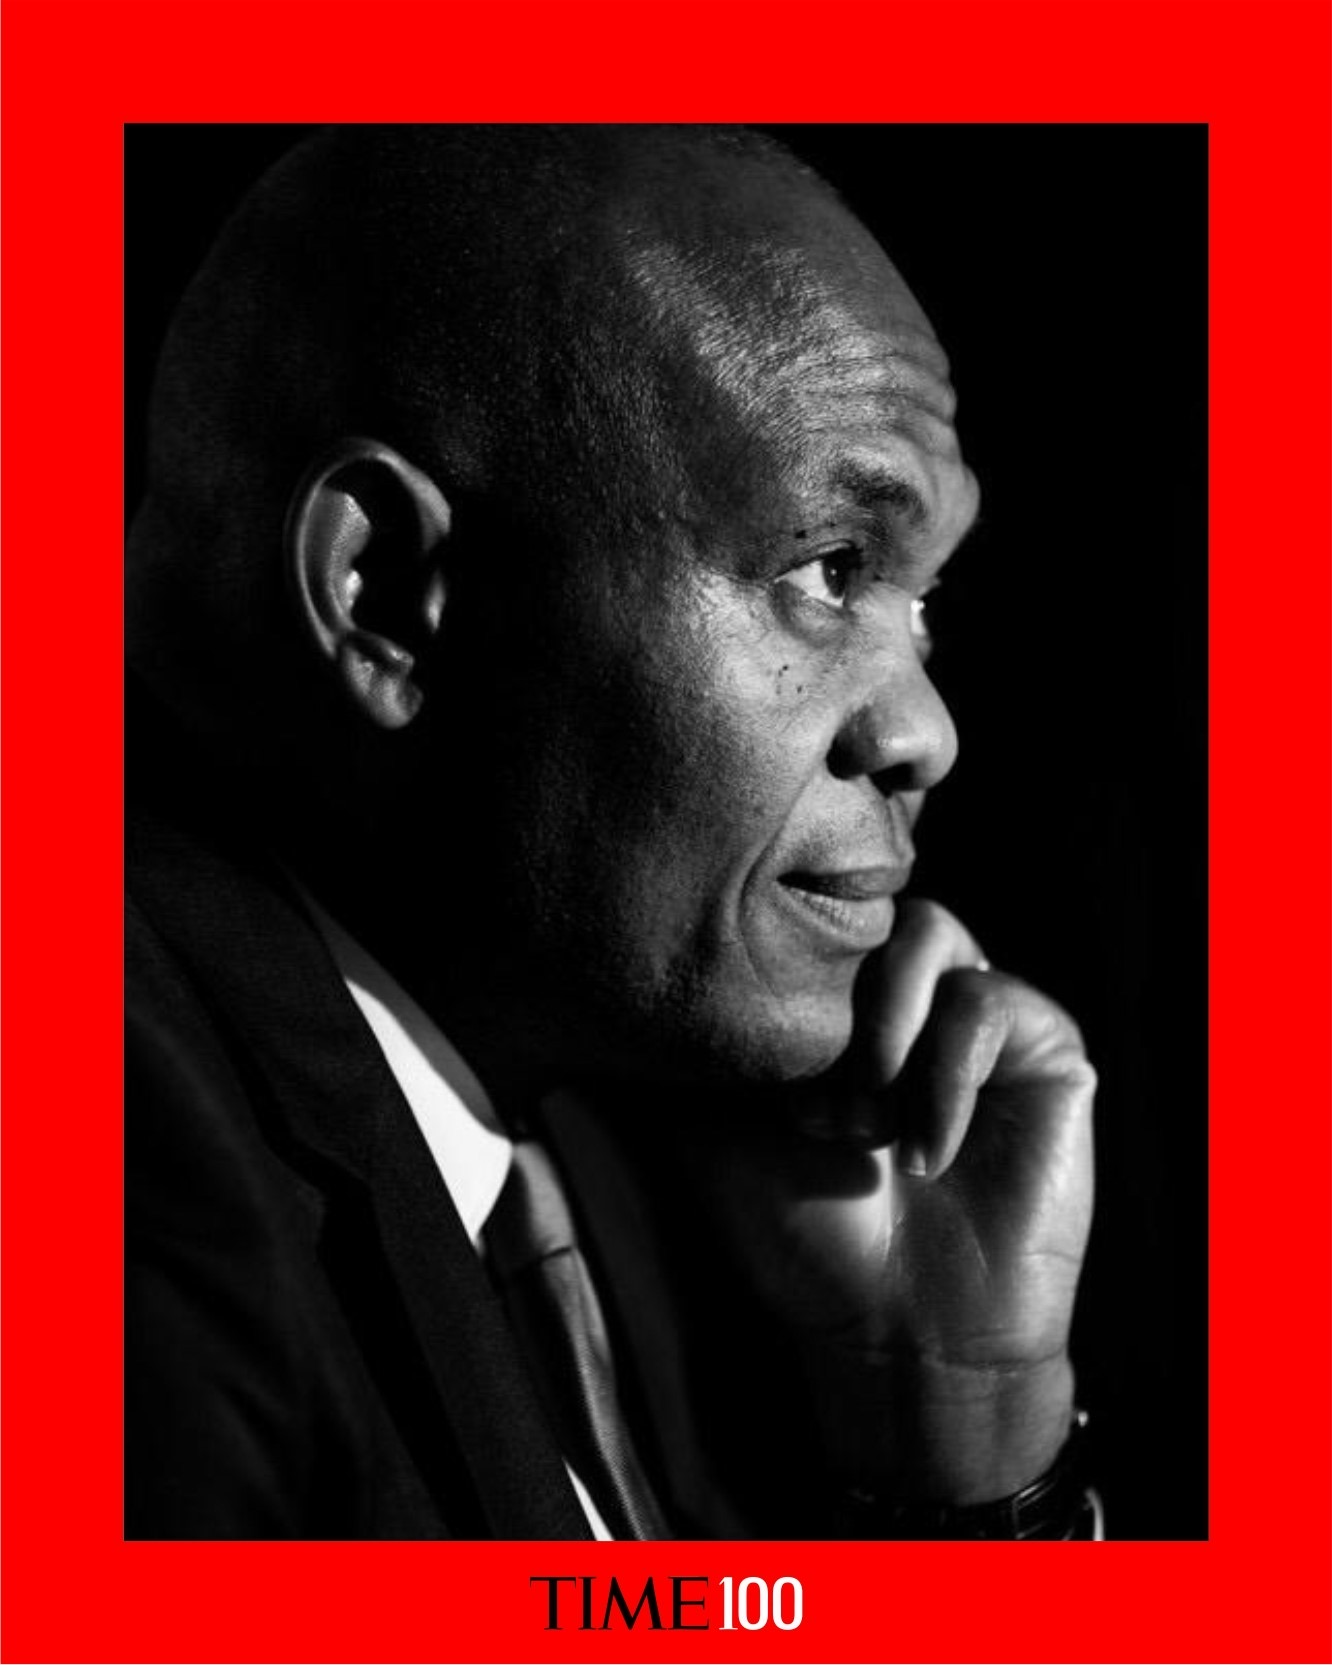 Tony Elumelu Named In “TIME 100” List Of The 100 Most Influential People In The World 2020